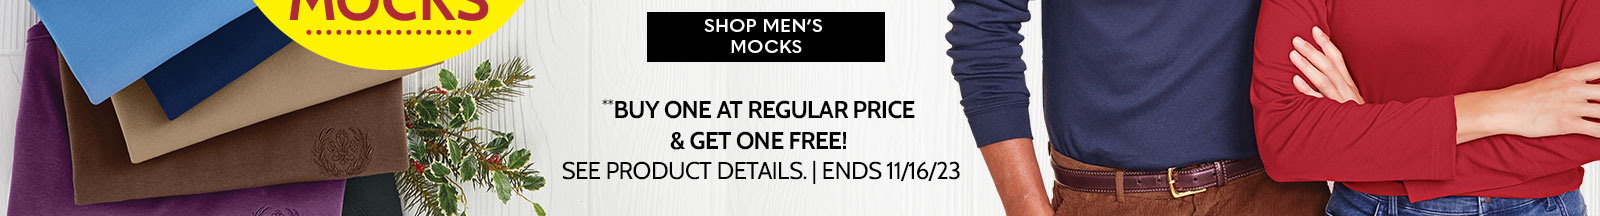 wow! a really big deal bogo free mocks** essential knits it's mock madness! shop women's mocks ends 11/16/23 | buy one at regular price get one free! **See product details